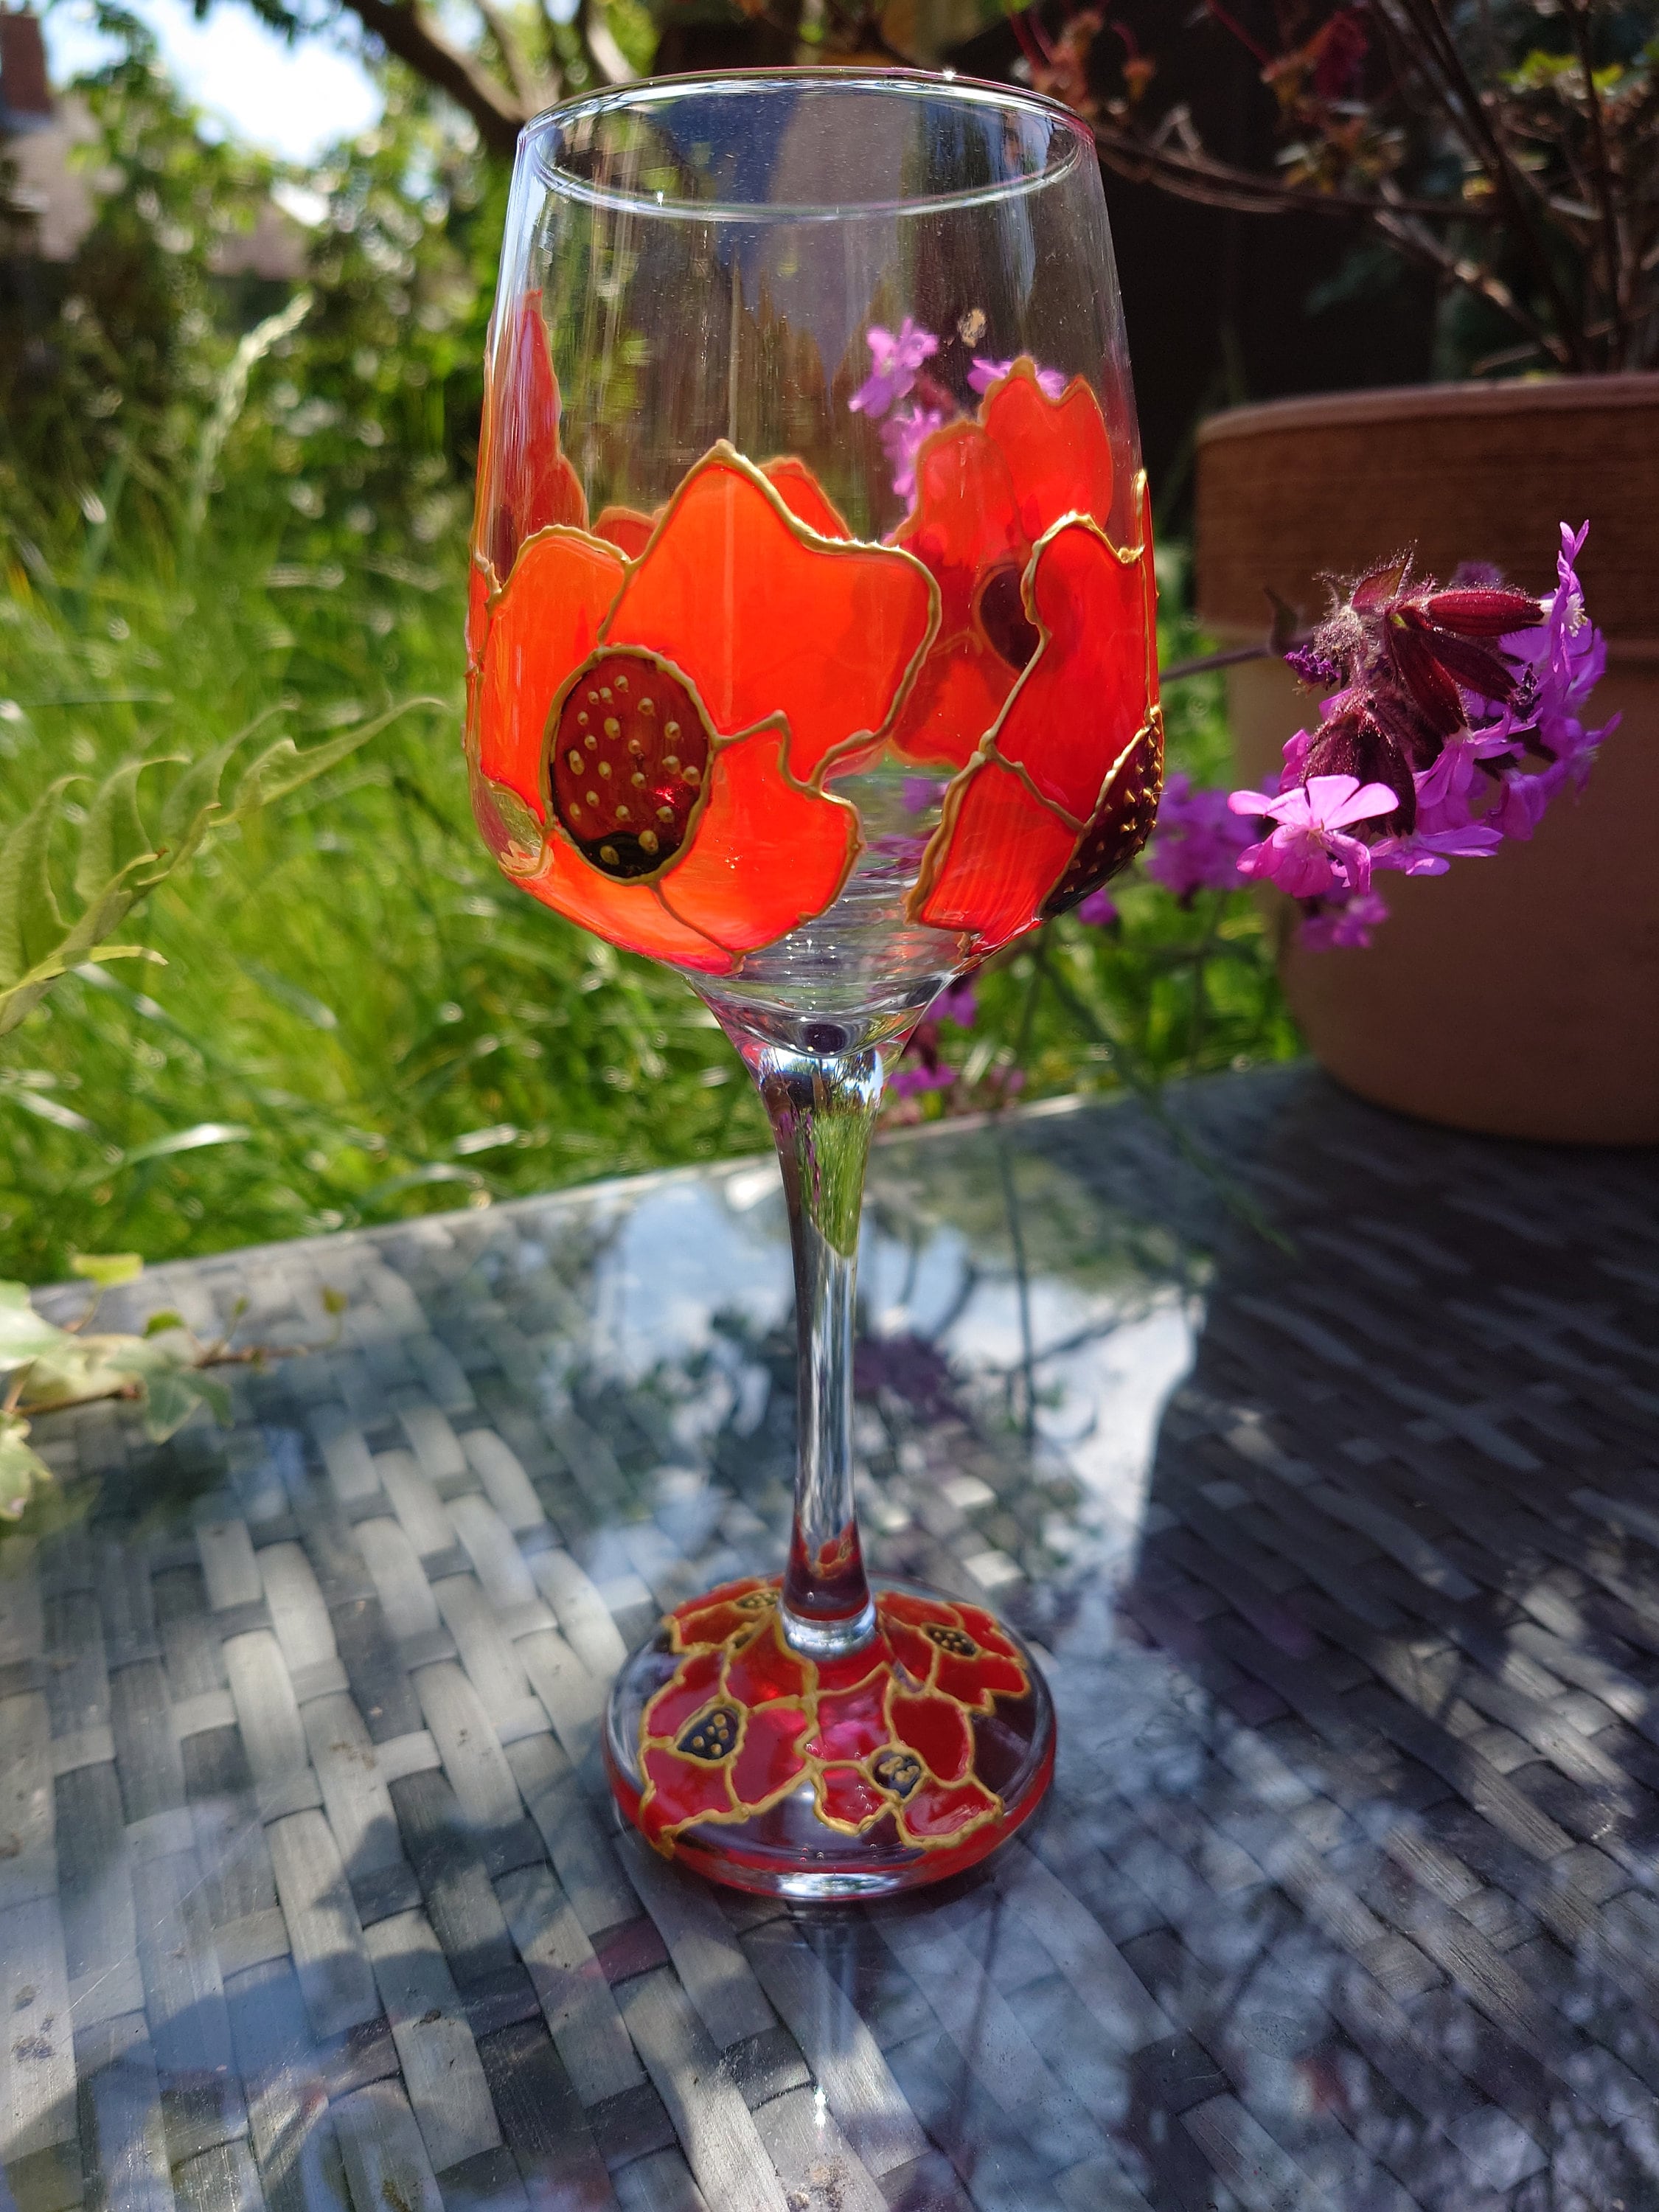 Set of designer wine glasses decorated with handmade stained glass painting  2 items